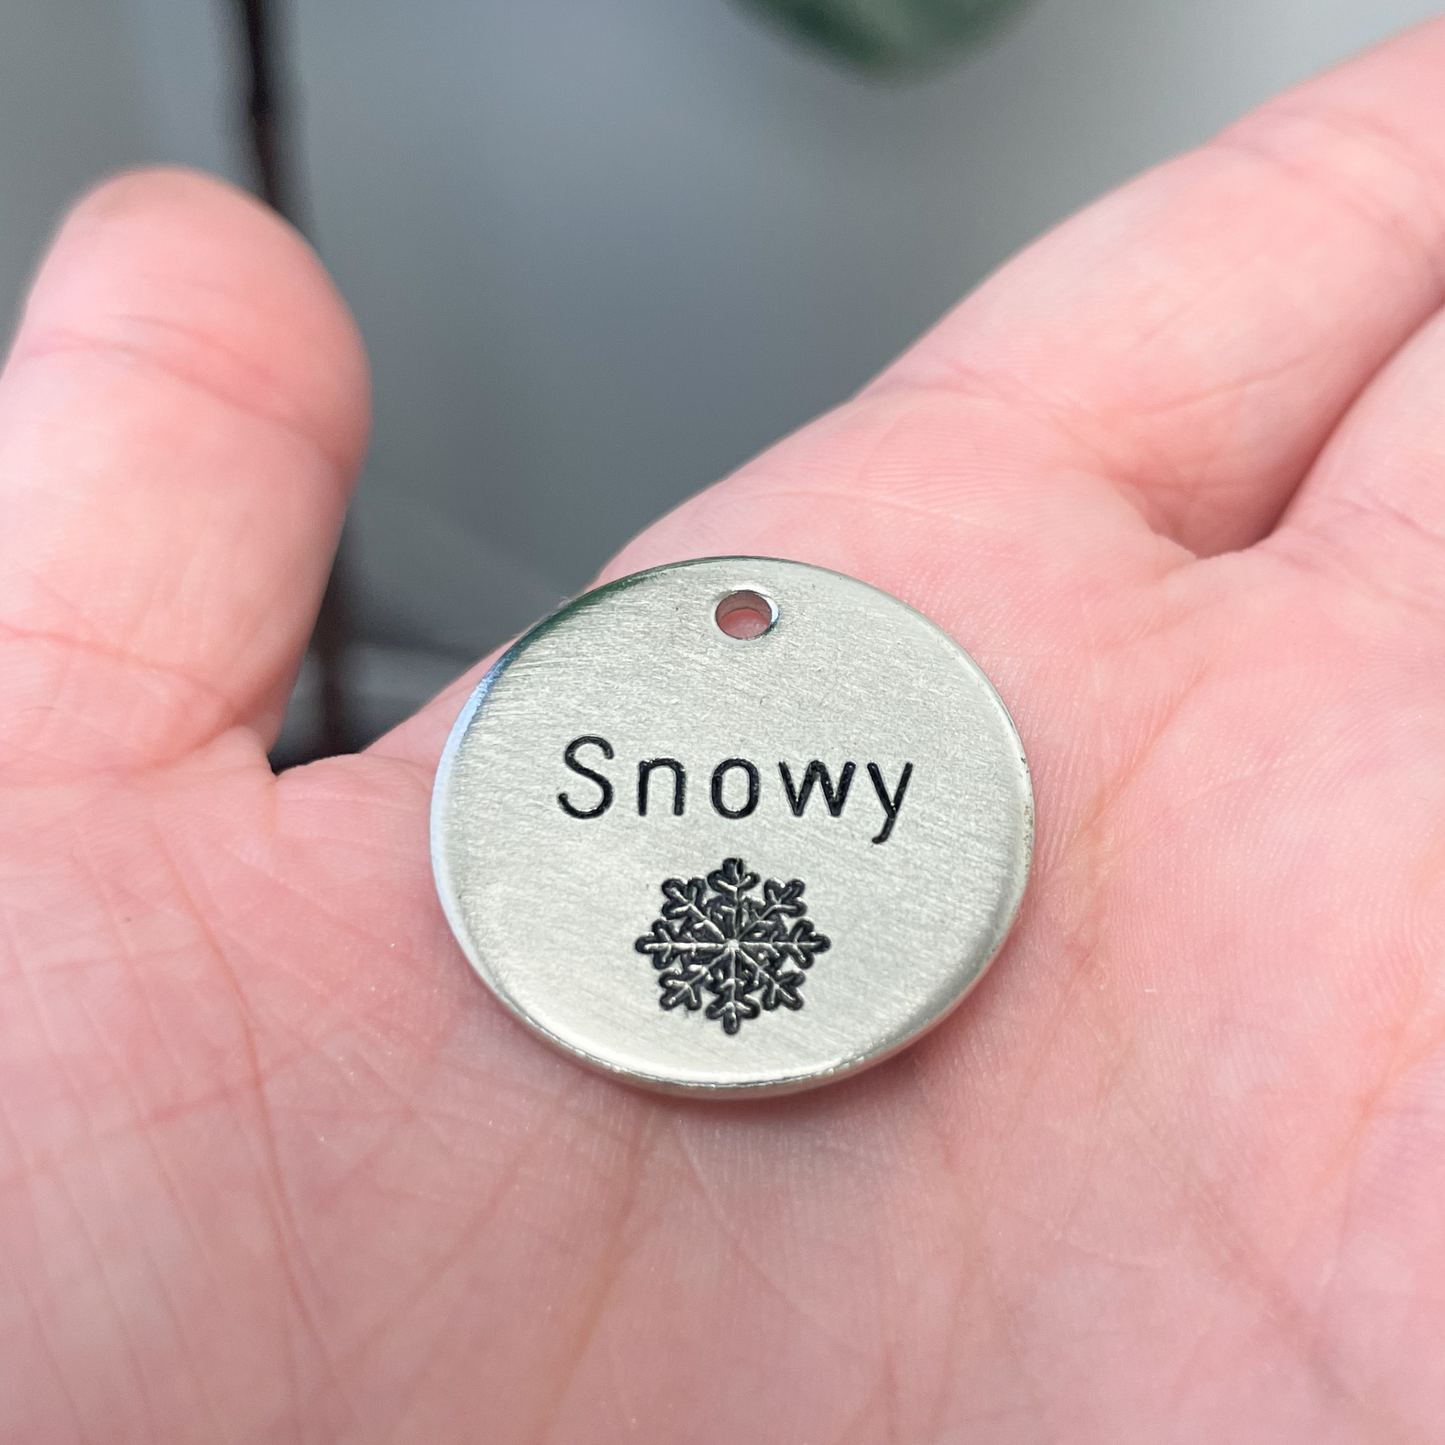 Personalized Dog Tag - Snowflake Design Engraved Dog Tag - Christmas Design Tag - Cat ID Tag - Dog Collar Tag - Custom Dog Tag - Personalized Tag - Pet ID Tag - Pet Name Tag - Christmas Themed Dog Tag 